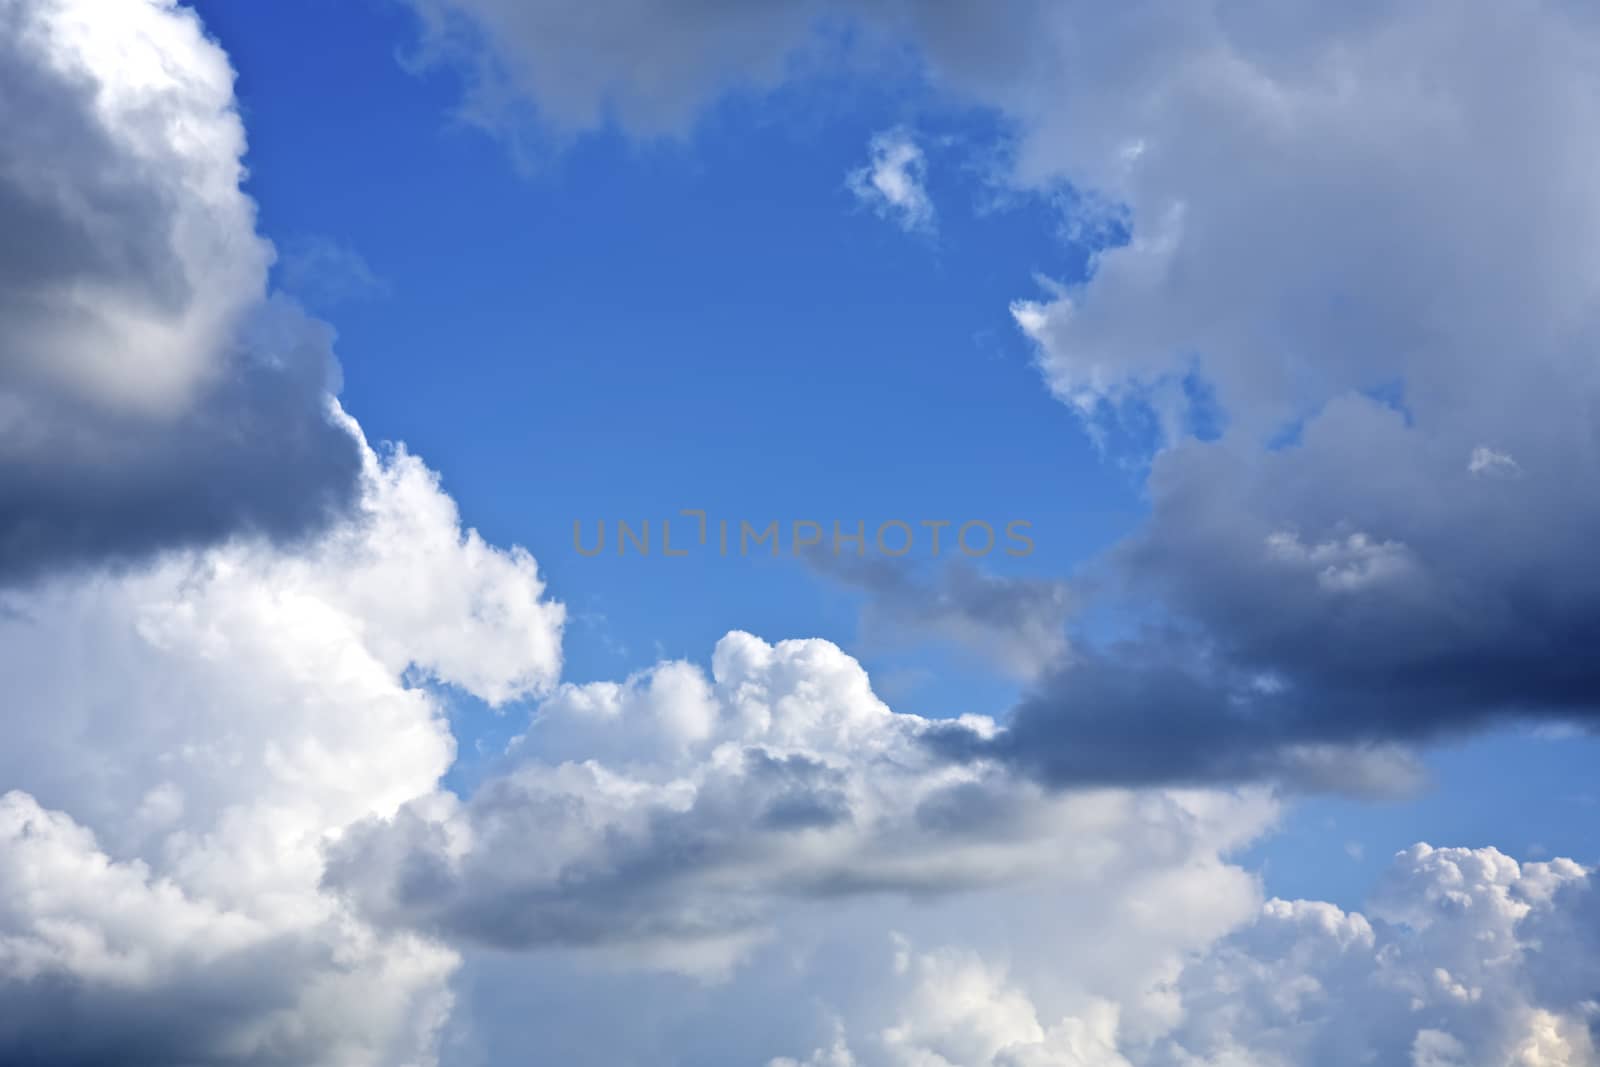 Blue Sky With White and Stormy Clouds Background